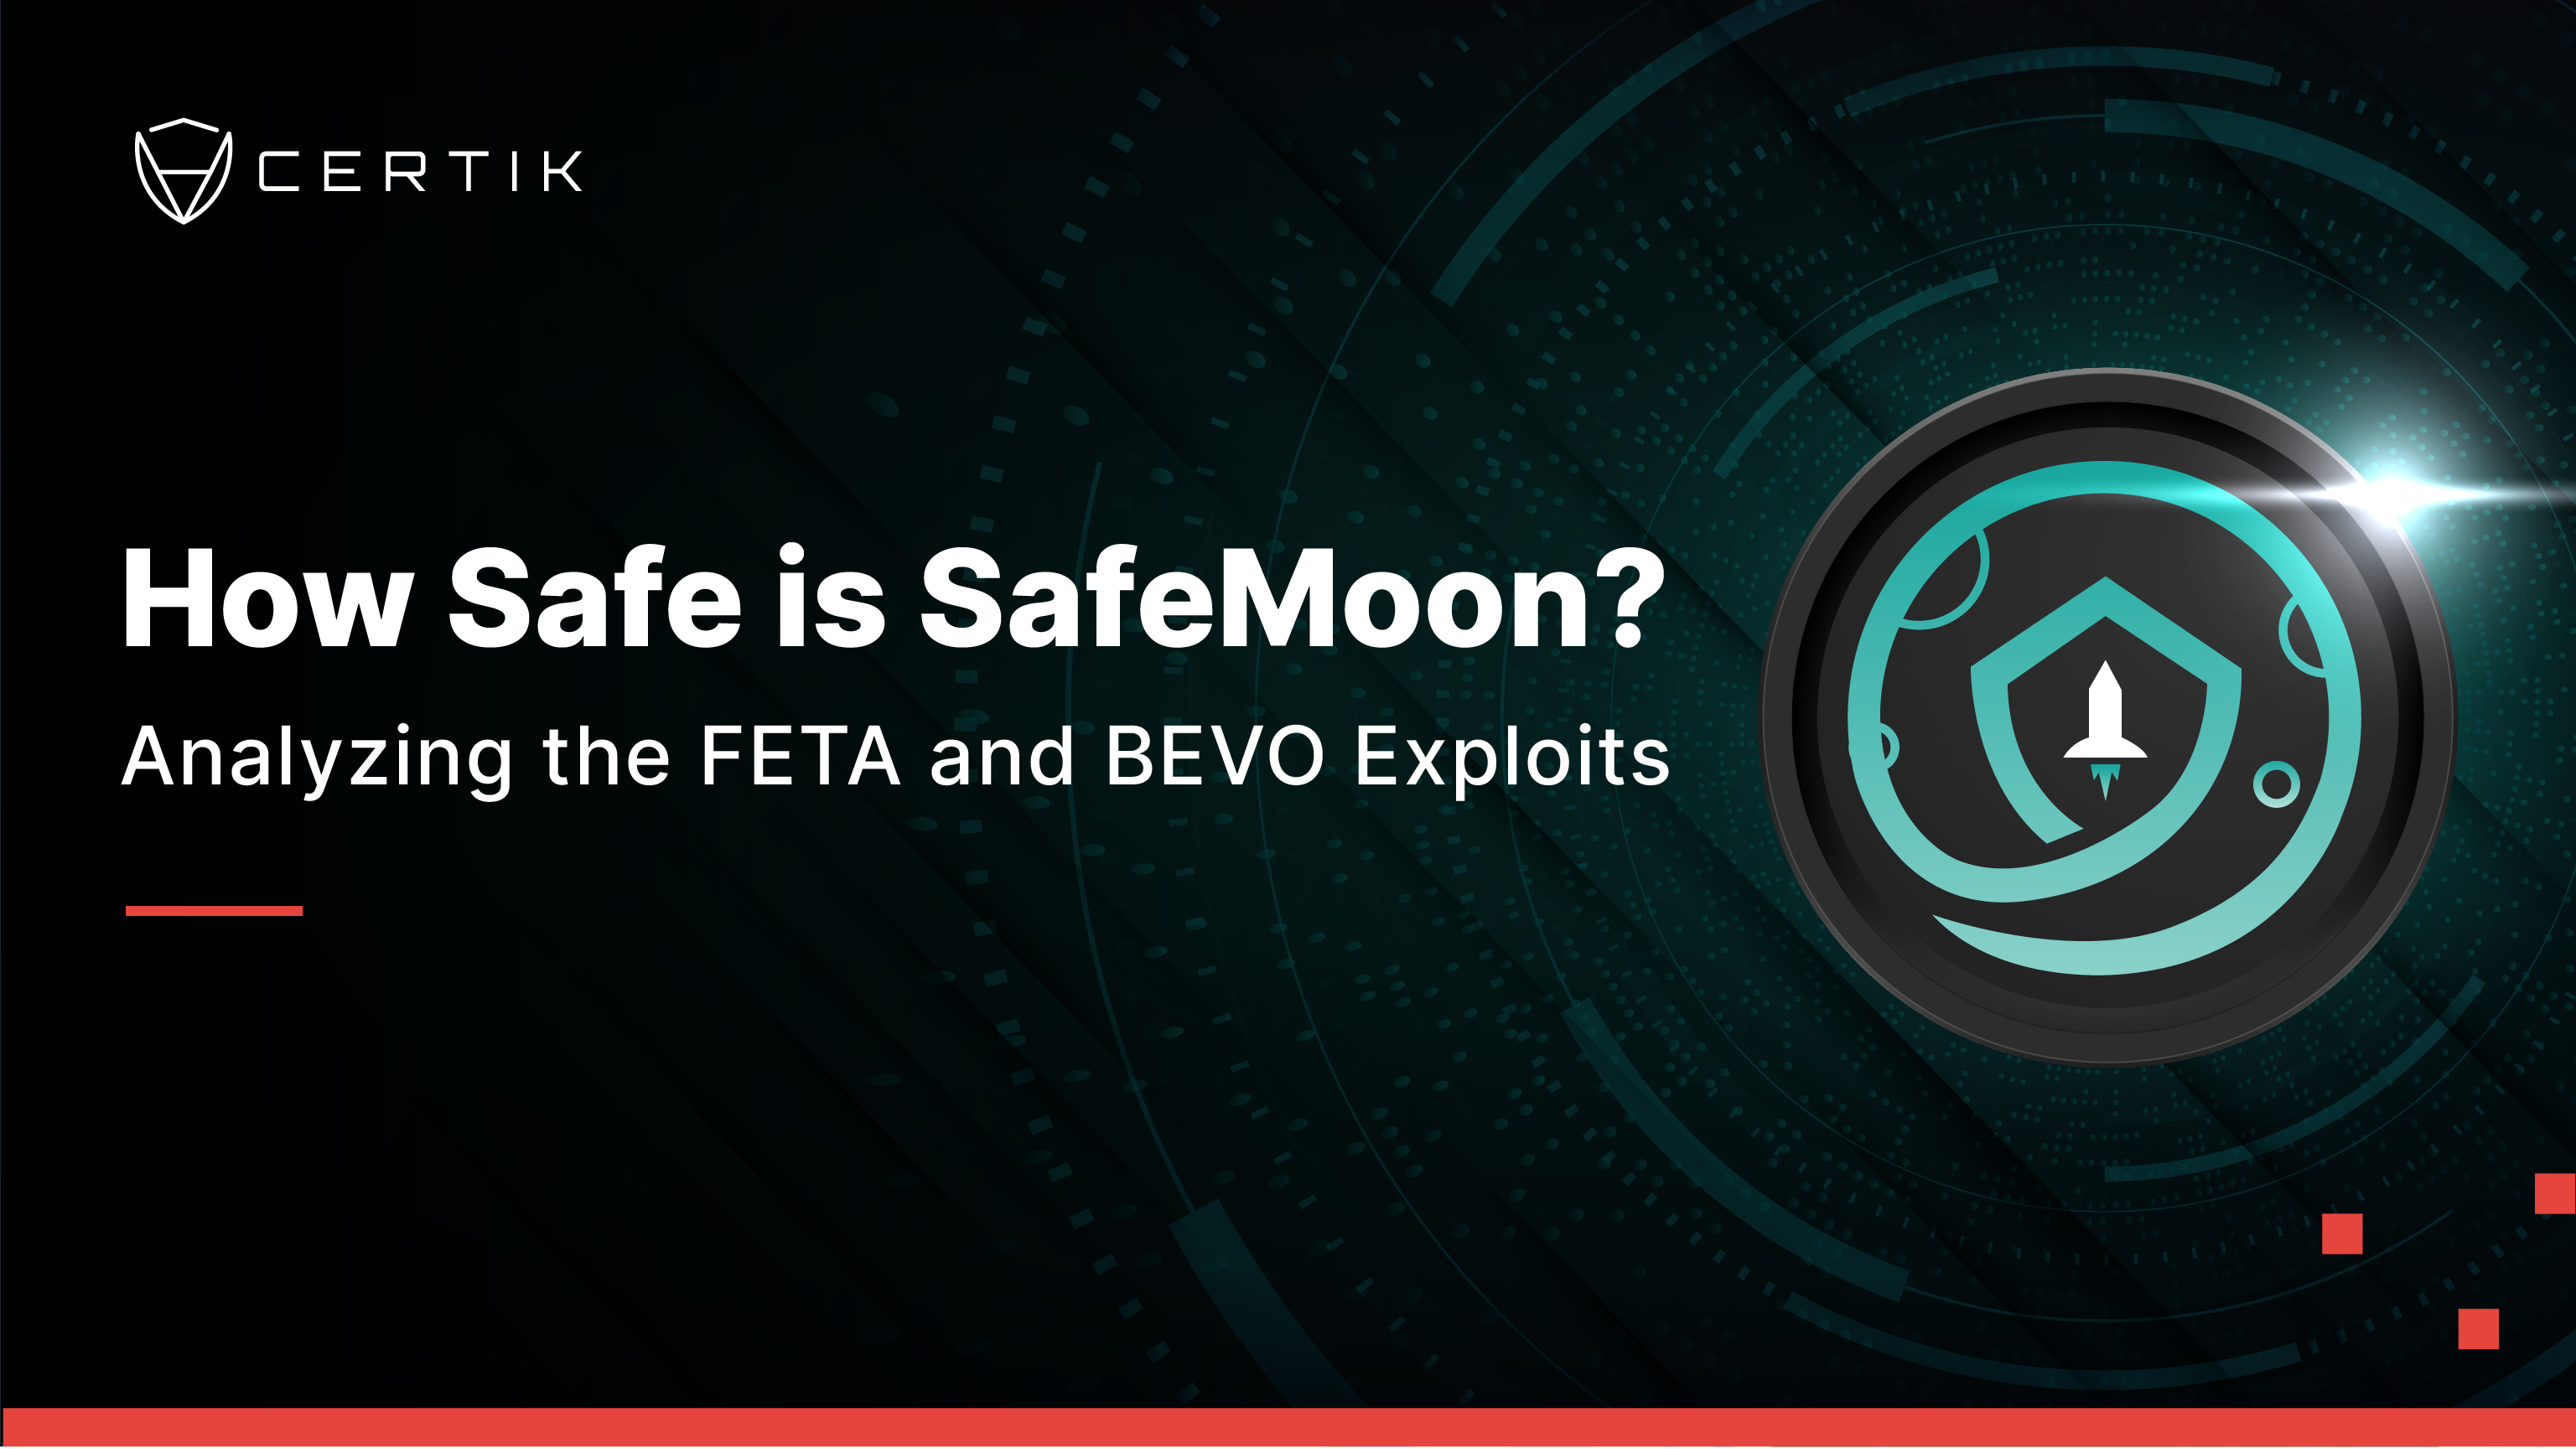 How Safe is SafeMoon? Analyzing the FETA and BEVO Exploits